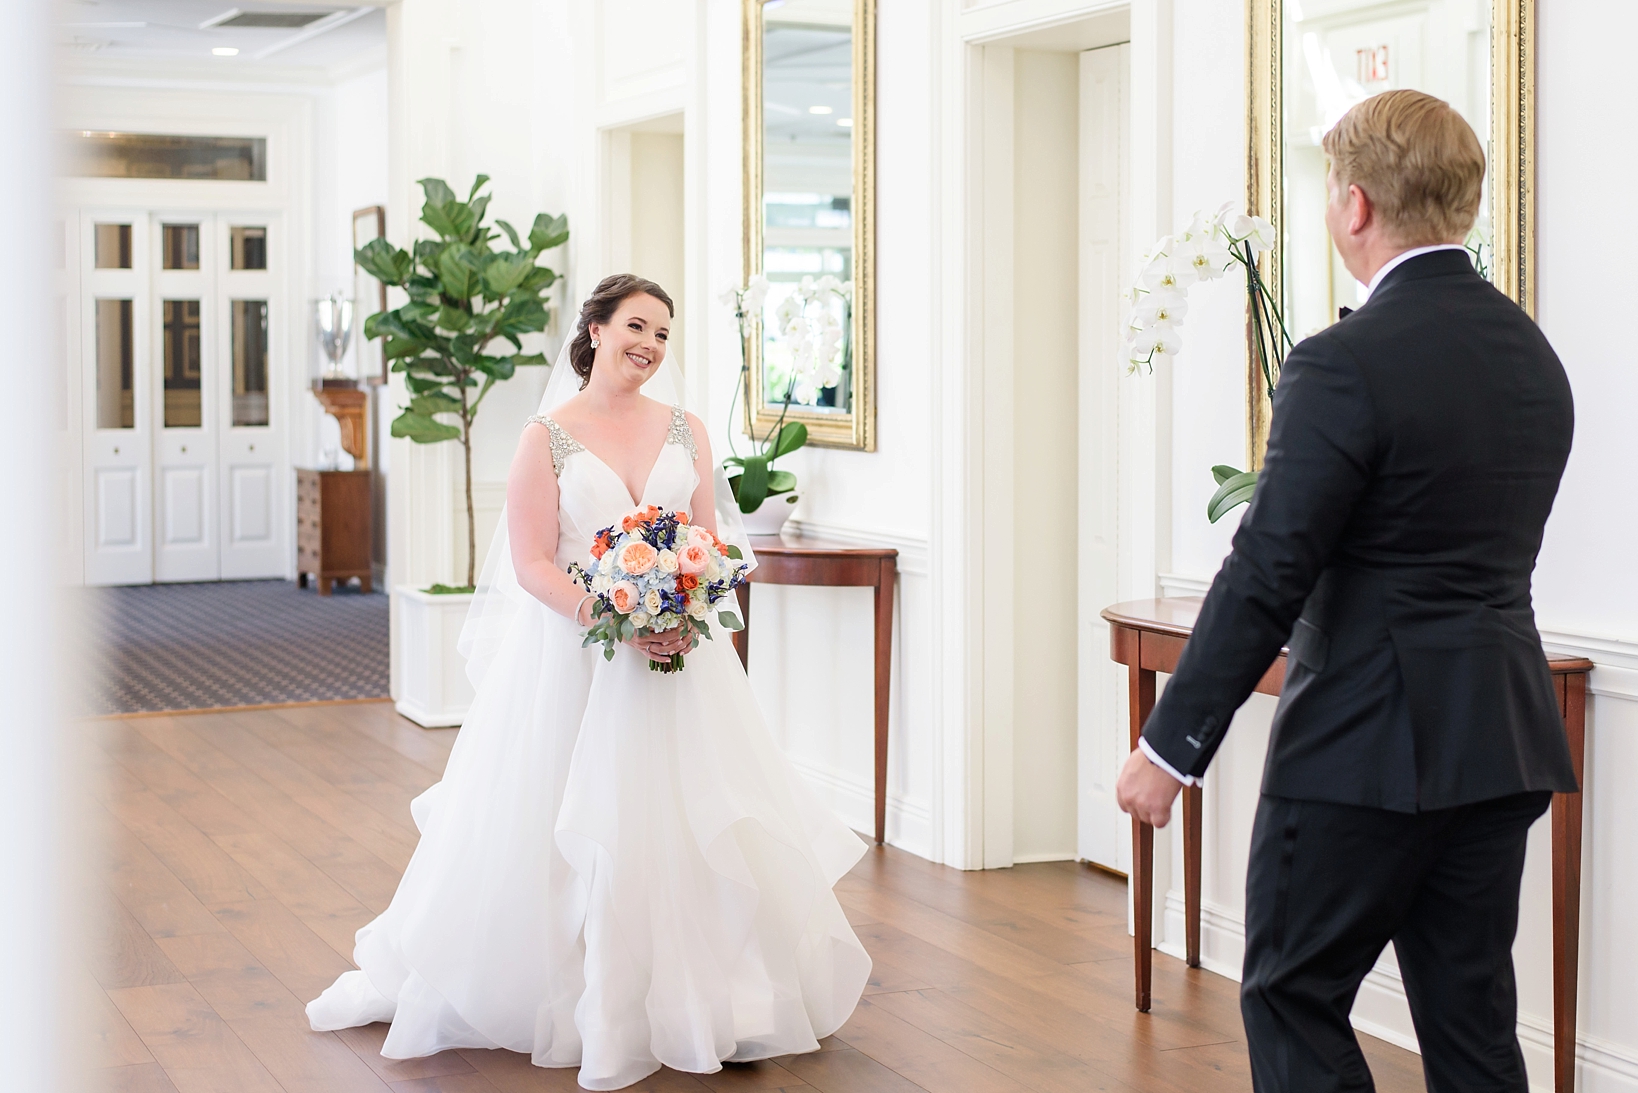 Bride seeing her Groom for the first time on their wedding day by Sarah & Ben Photography